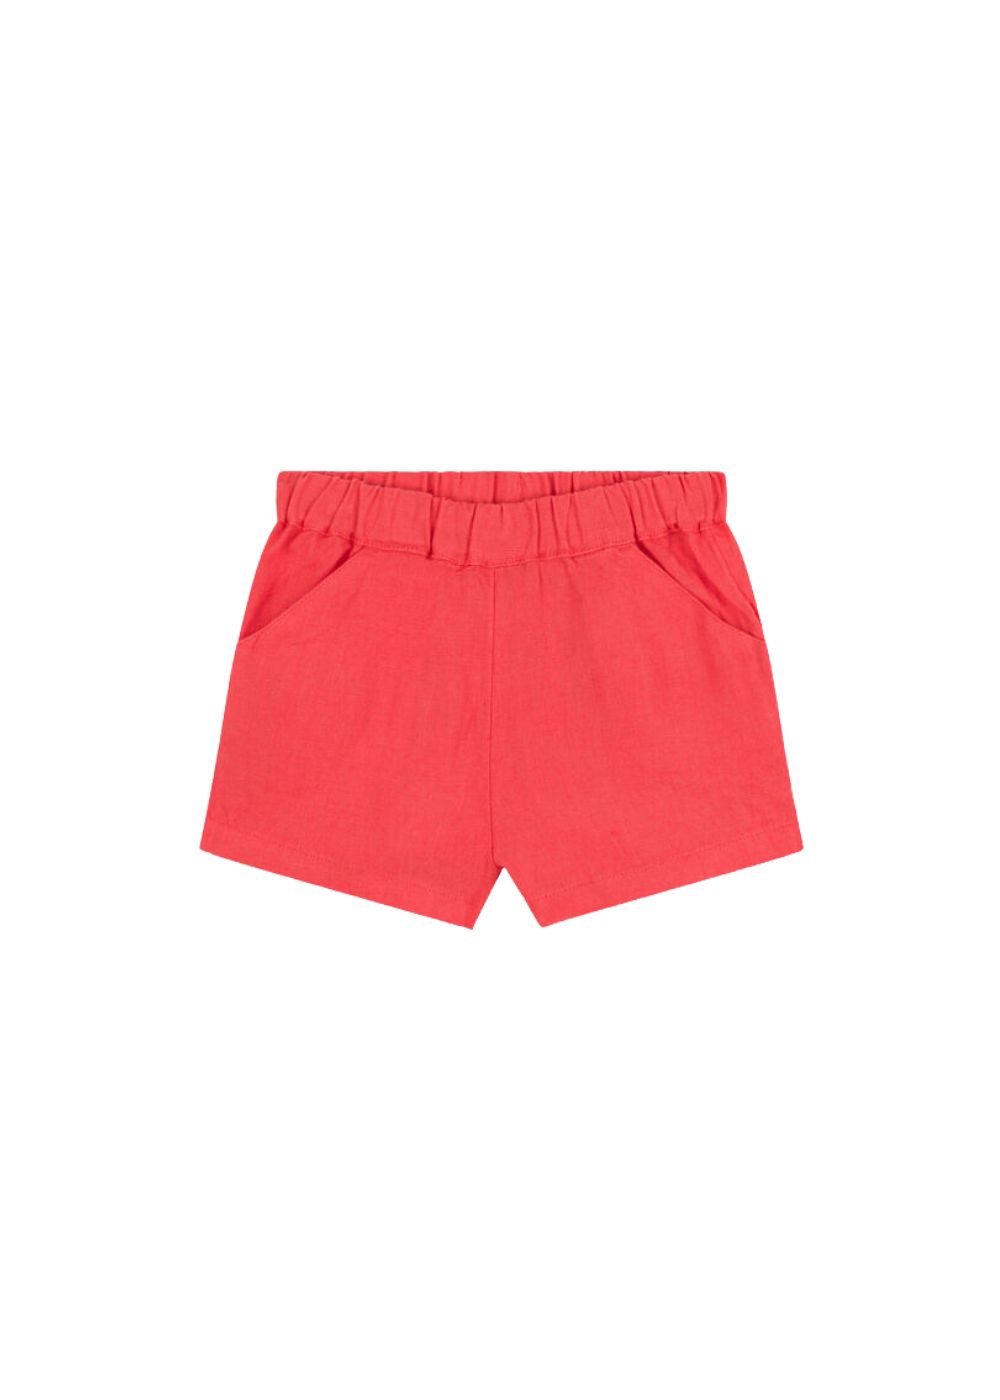 Featured image for “Petit Bateau Shorts in Lino”